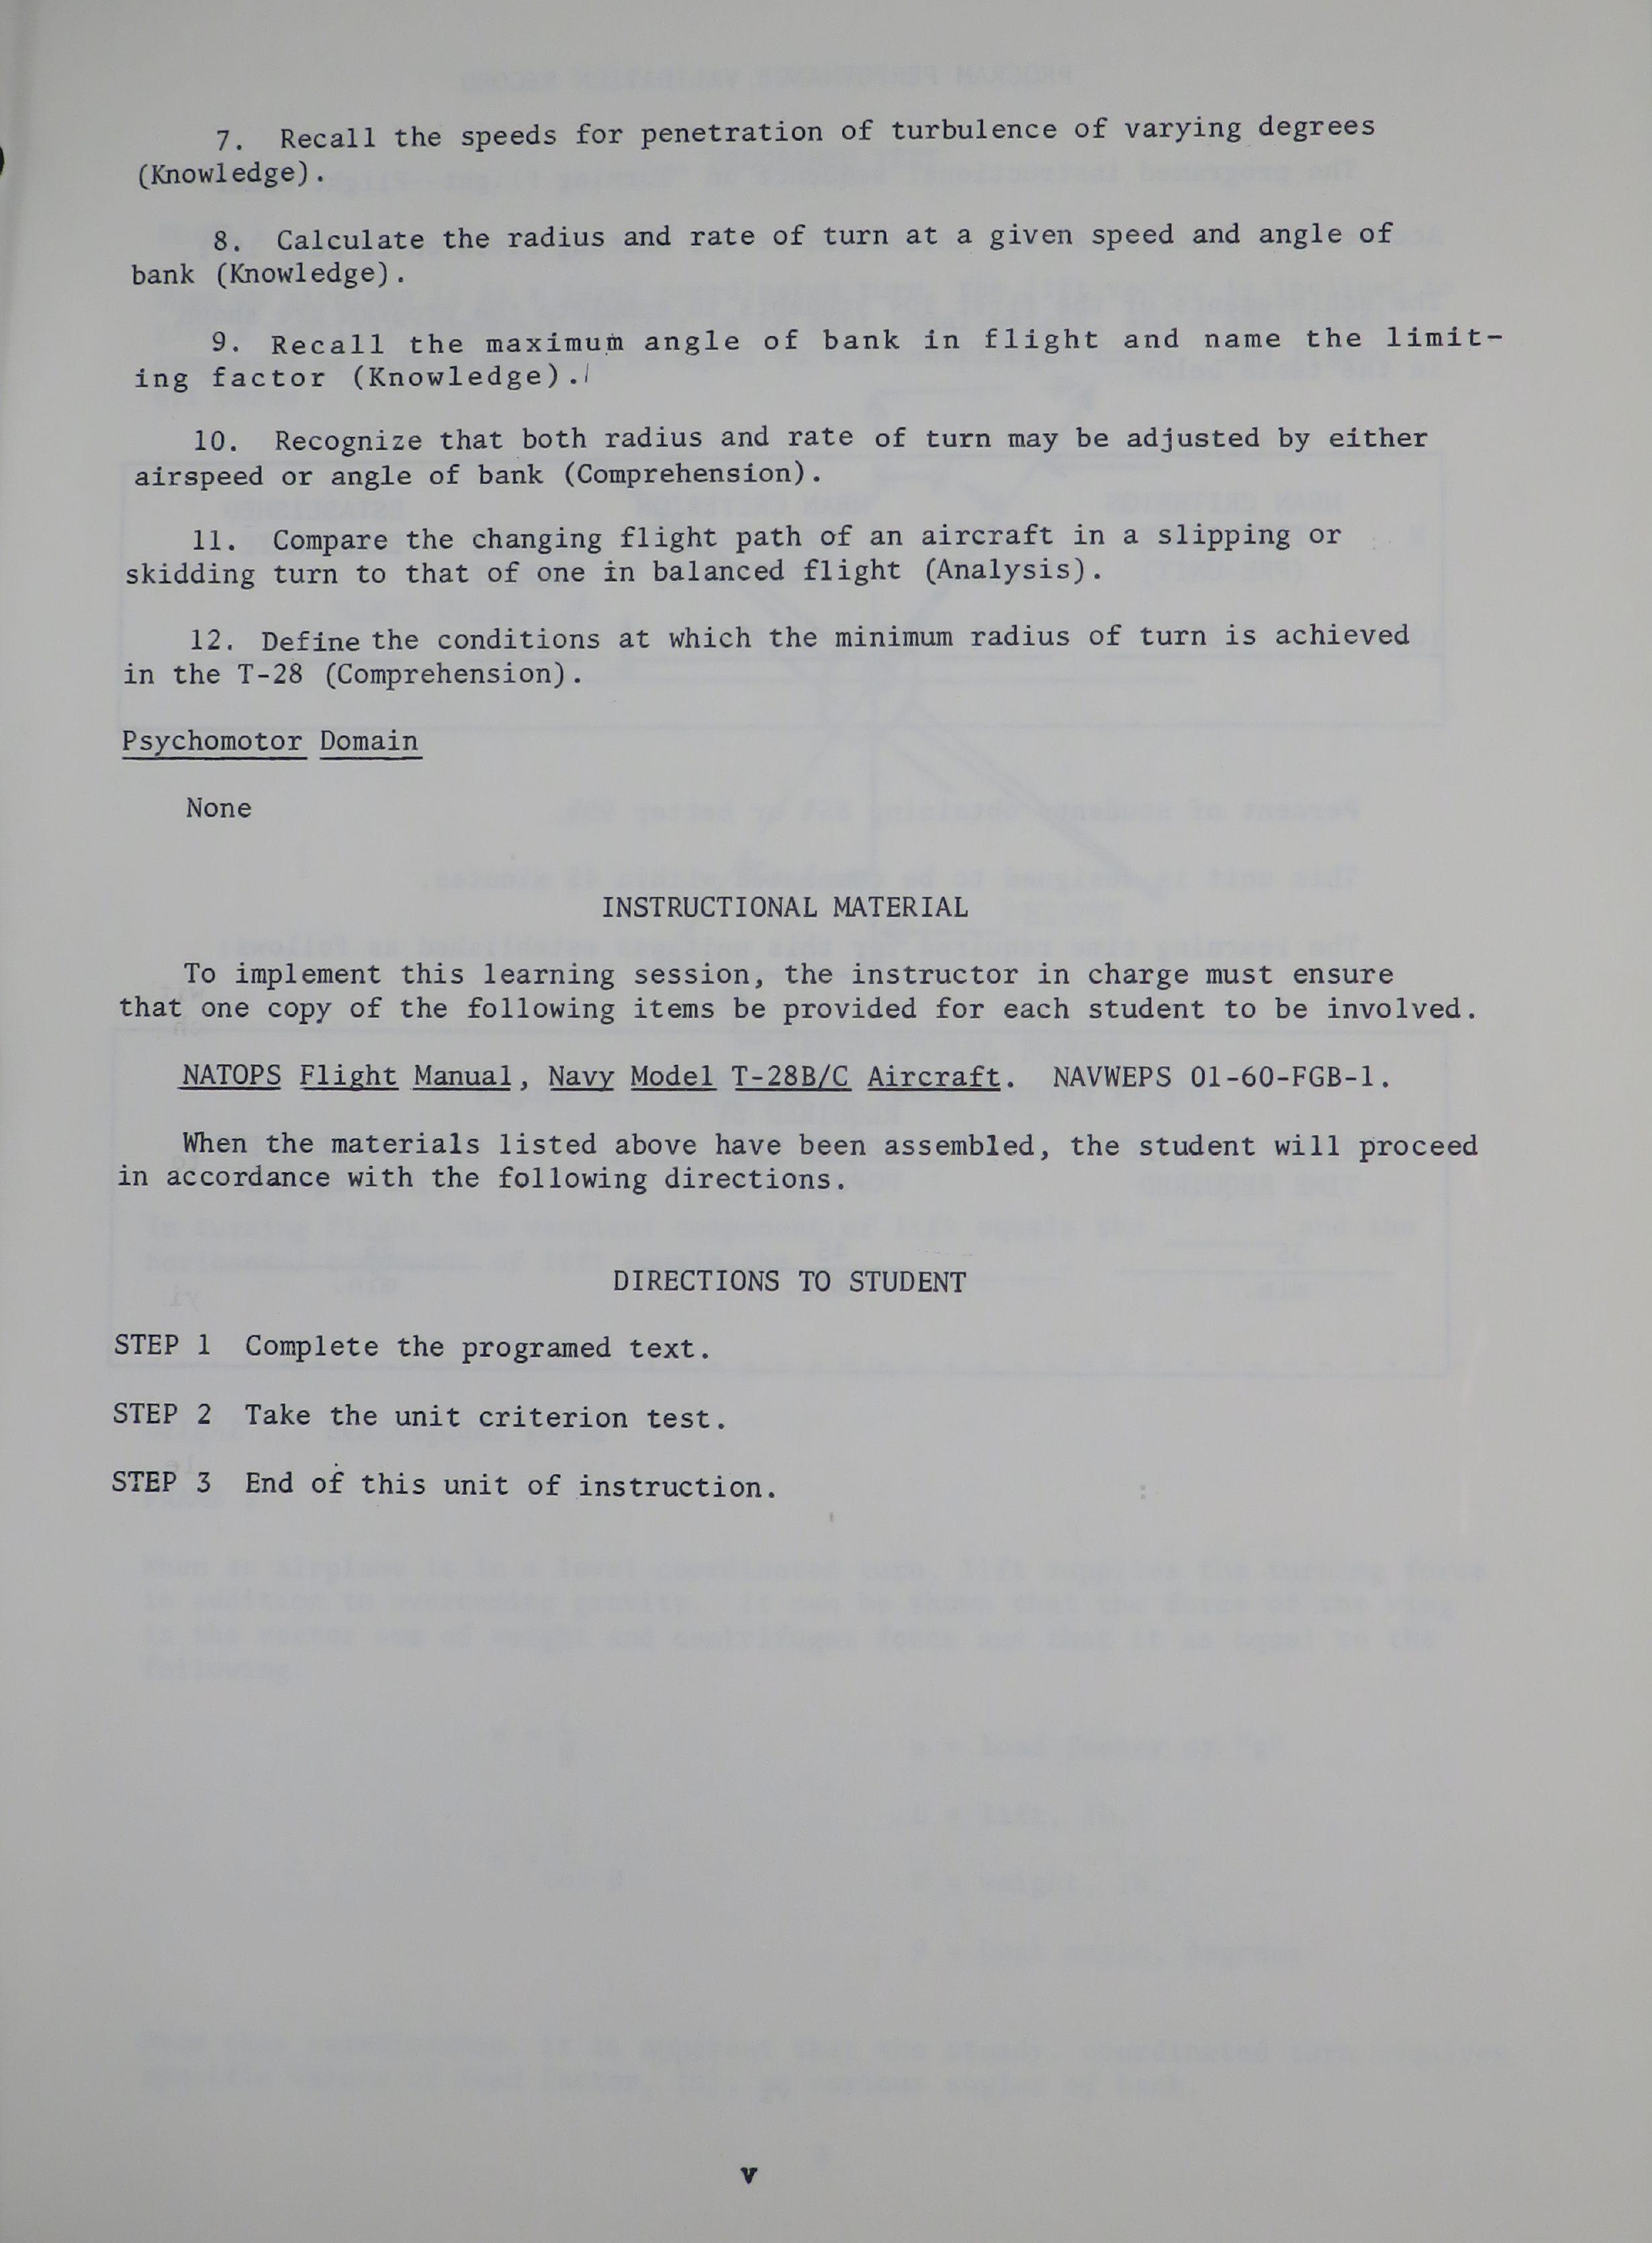 Sample page 5 from AirCorps Library document: Turning Flight - Flight Under Accelerated Conditions